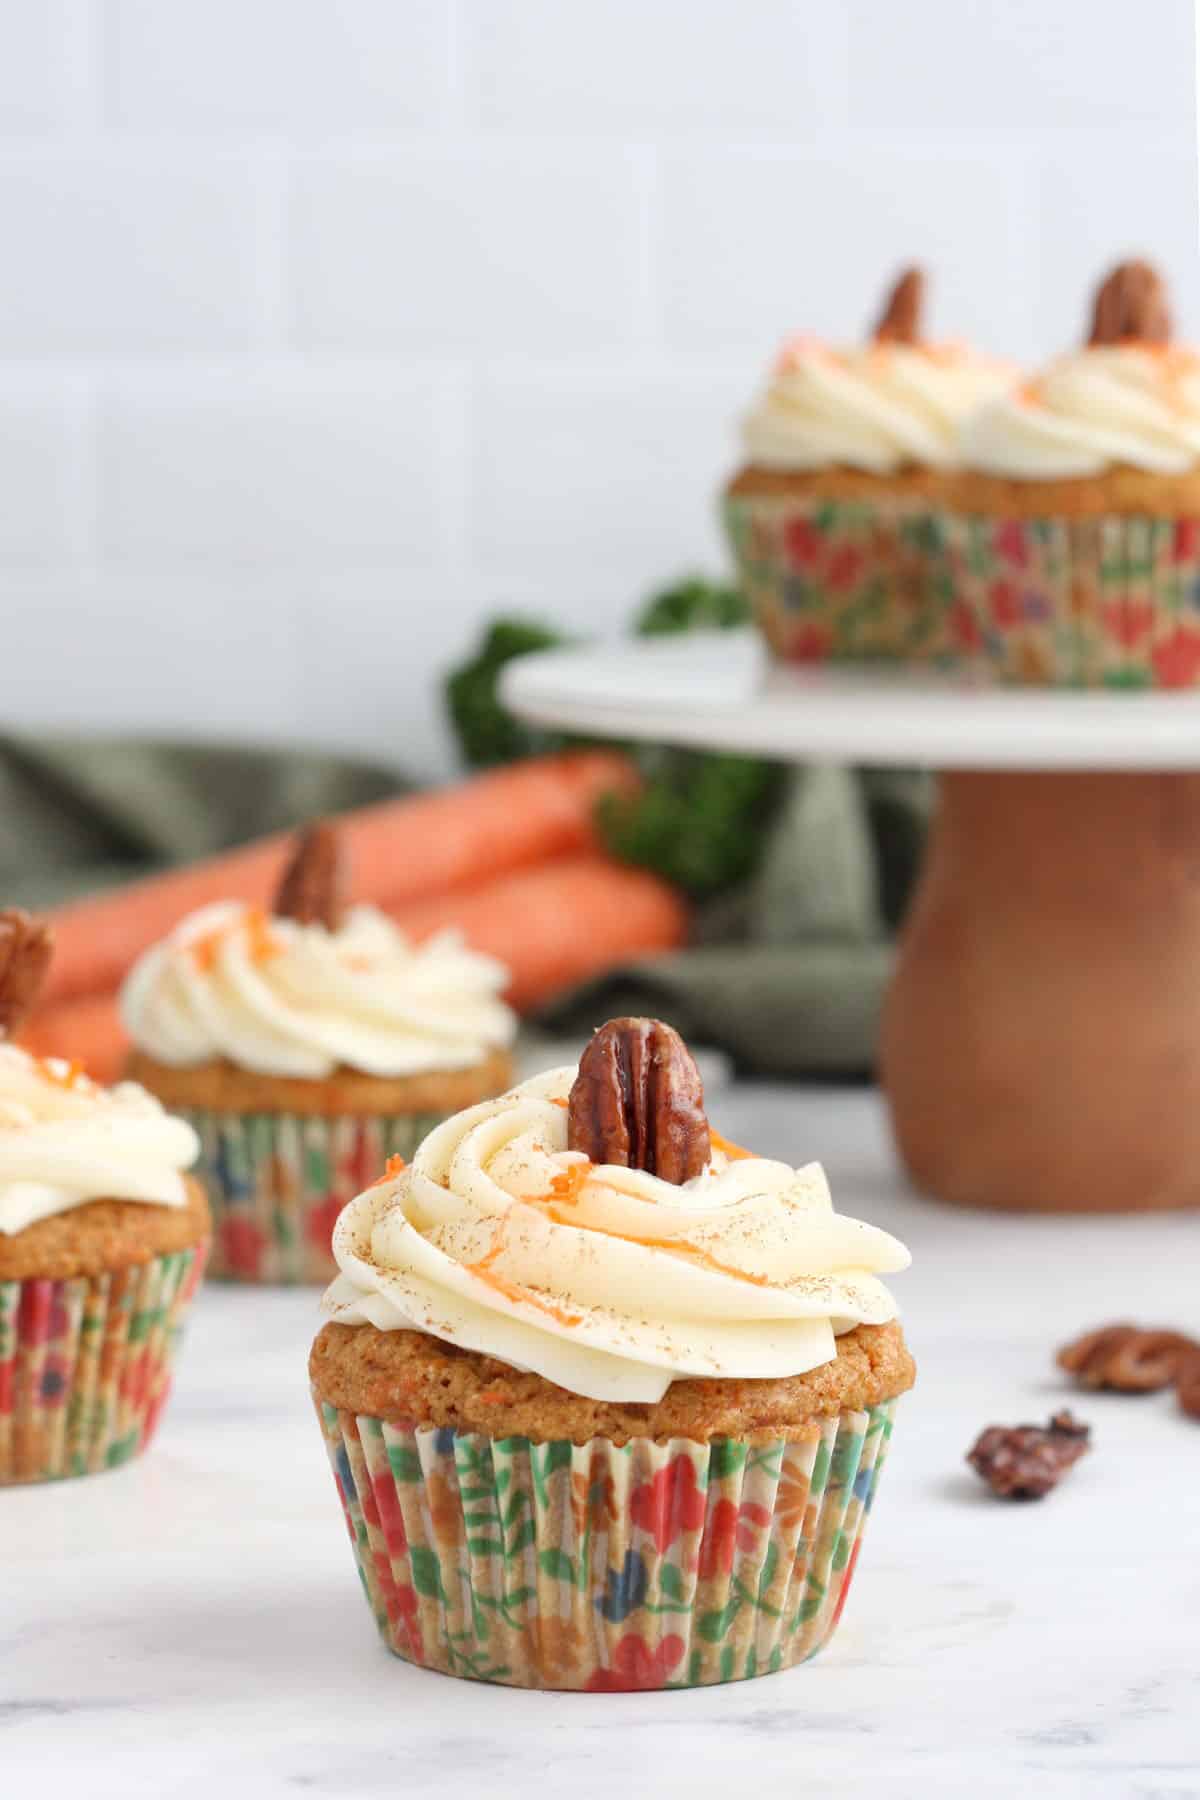 carrot cake cupcake topped with cream cheese frosting and a glazed pecan